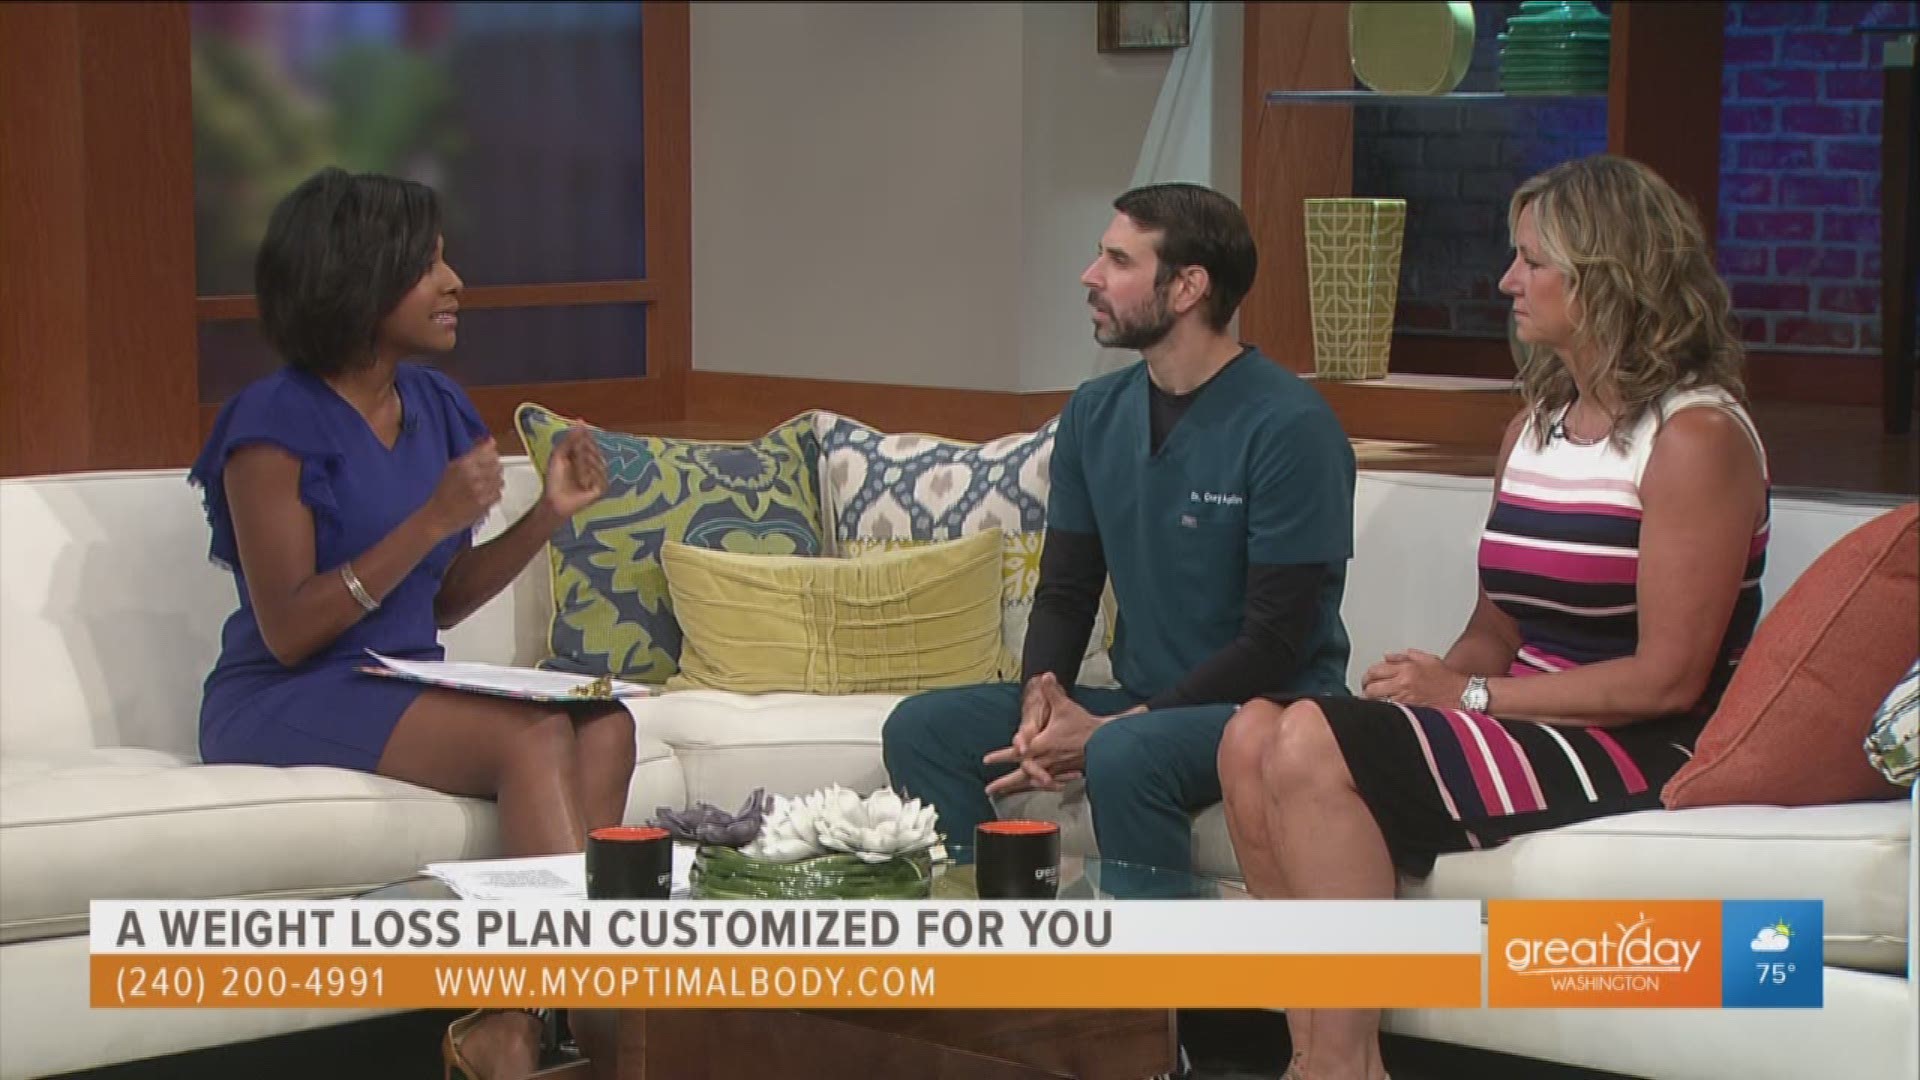 Dr. Cory Aplin, founder of Optimal Body introduces Markette to Chris Hummel who lost weight thanks to Optimal Body's natural approach to weight loss.  For more information call (240) 200-4991 or visit MyOptimalBody.com.  This segment is sponsored by Optimal Body.